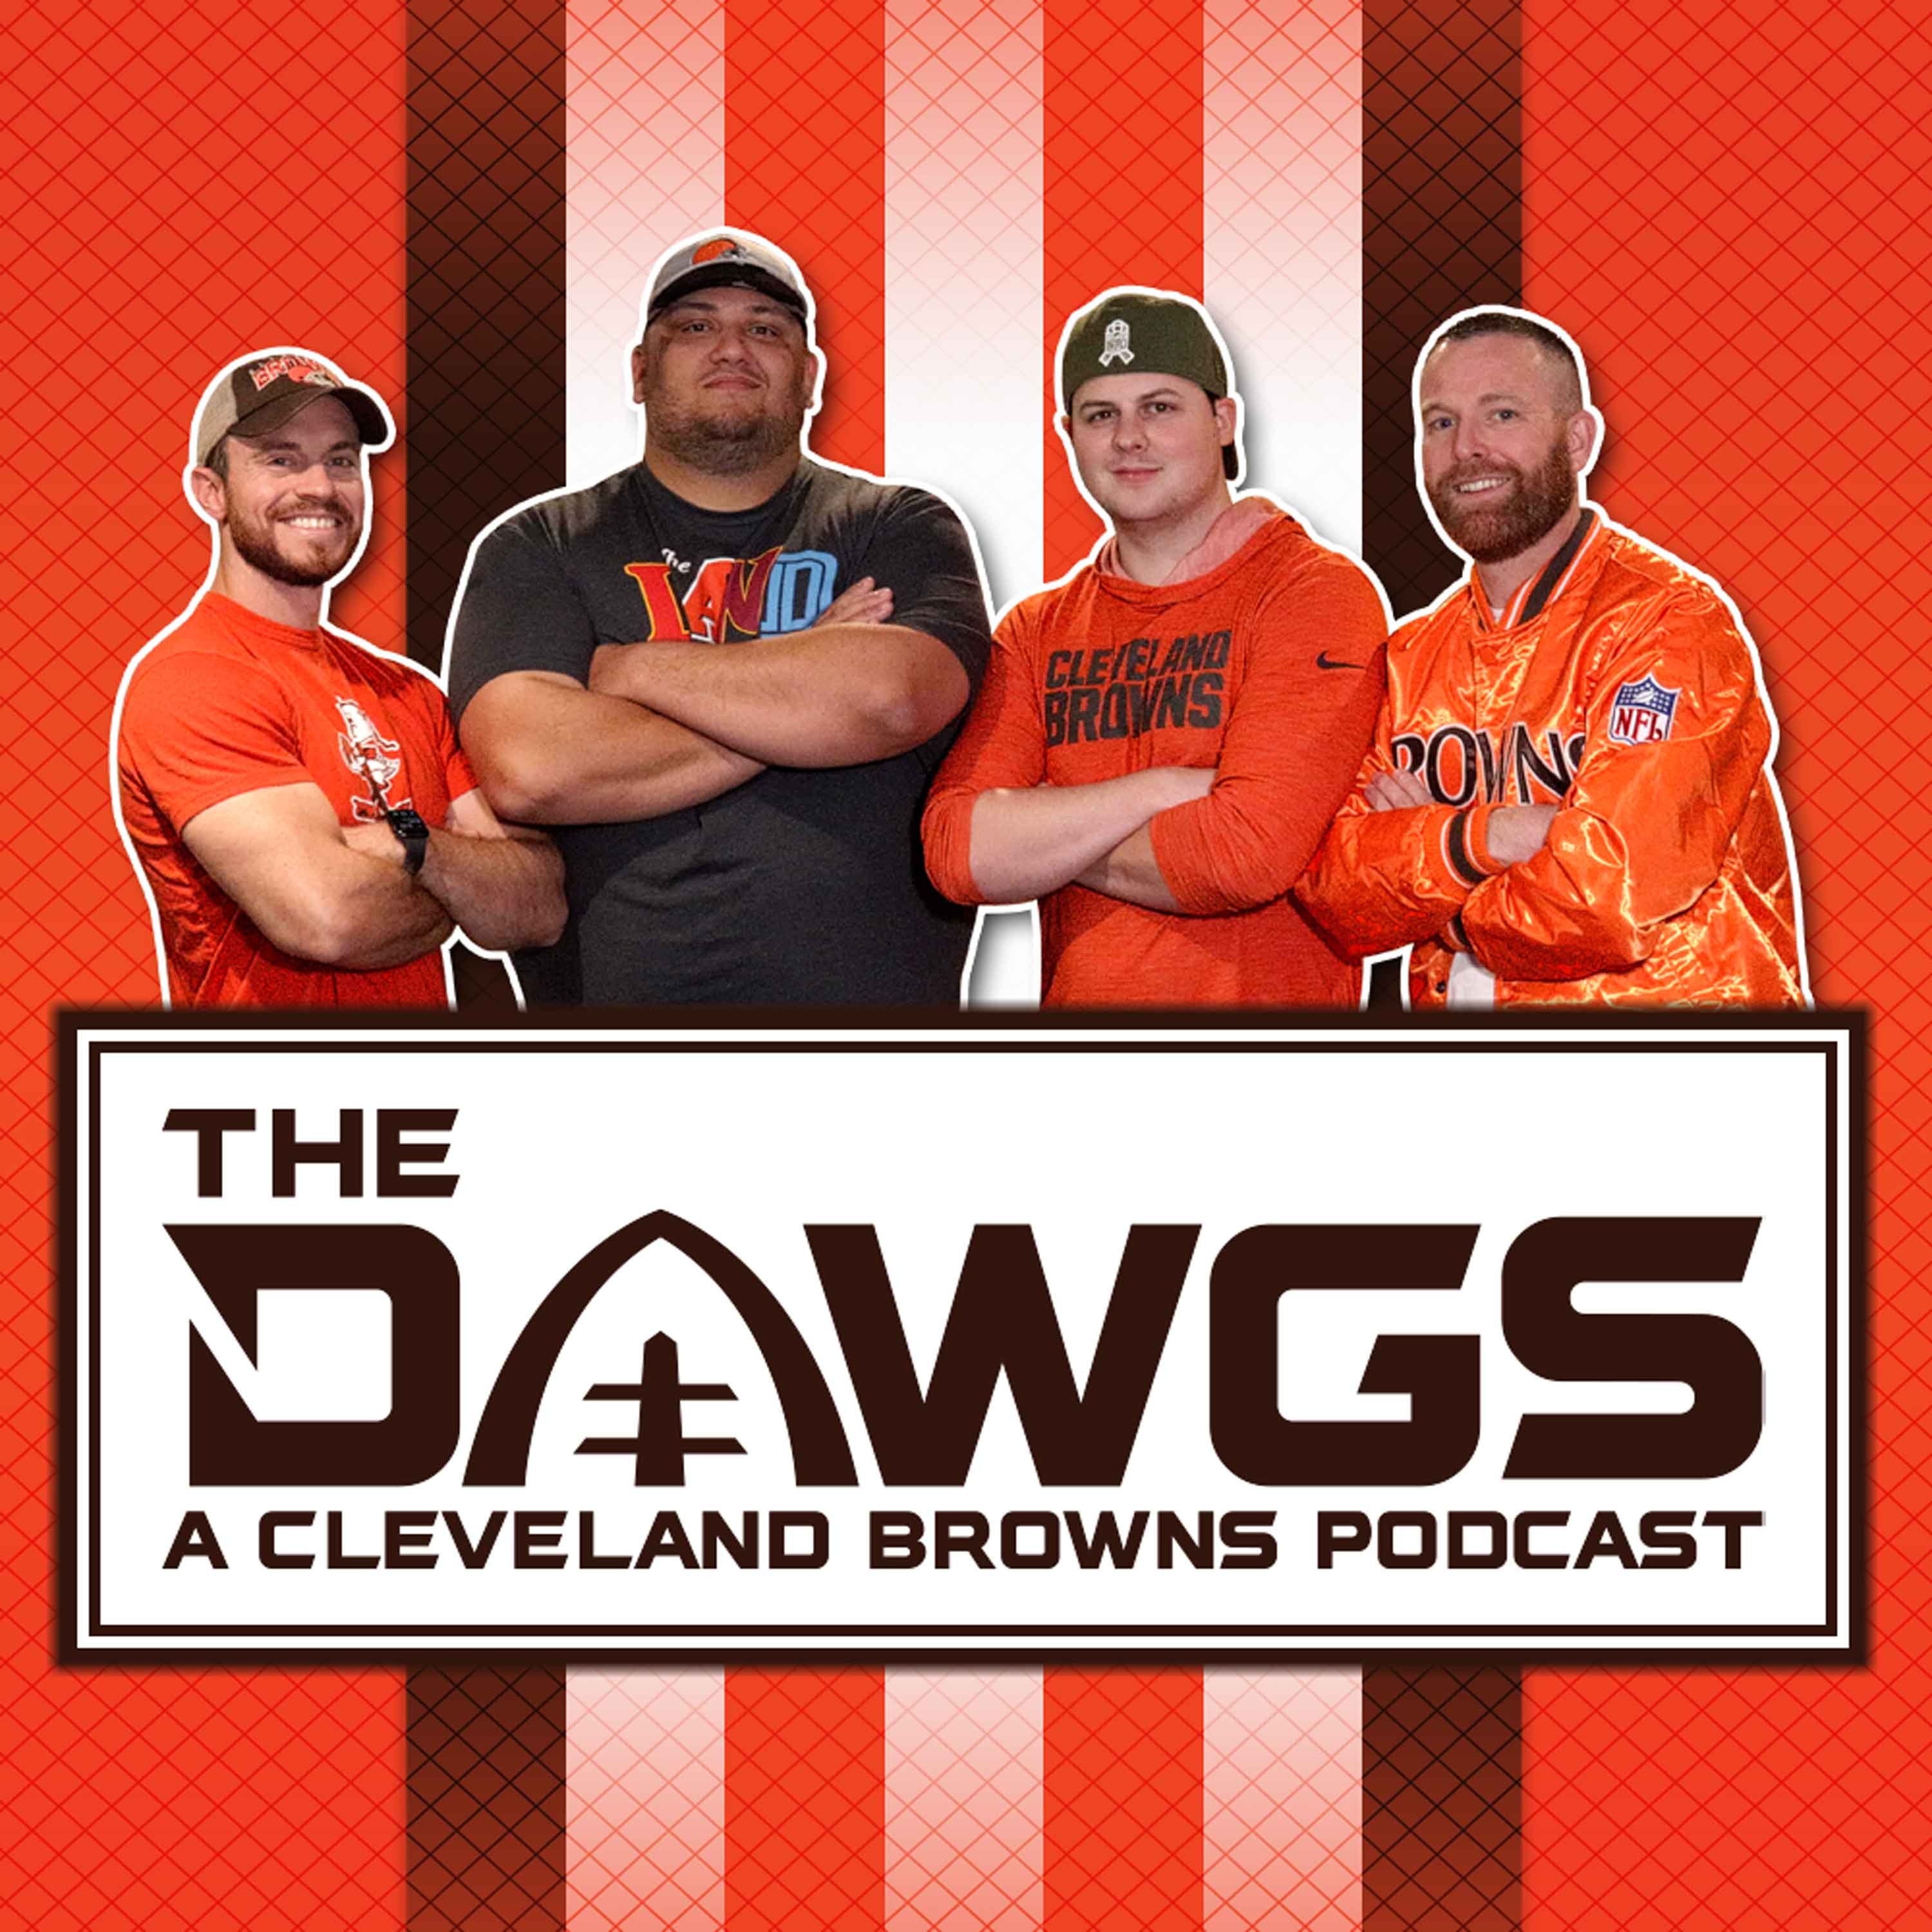 Marvin Mims and Jack Campbell - NFL Draft Prospects - Cleveland Browns Podcast for 3/27/23